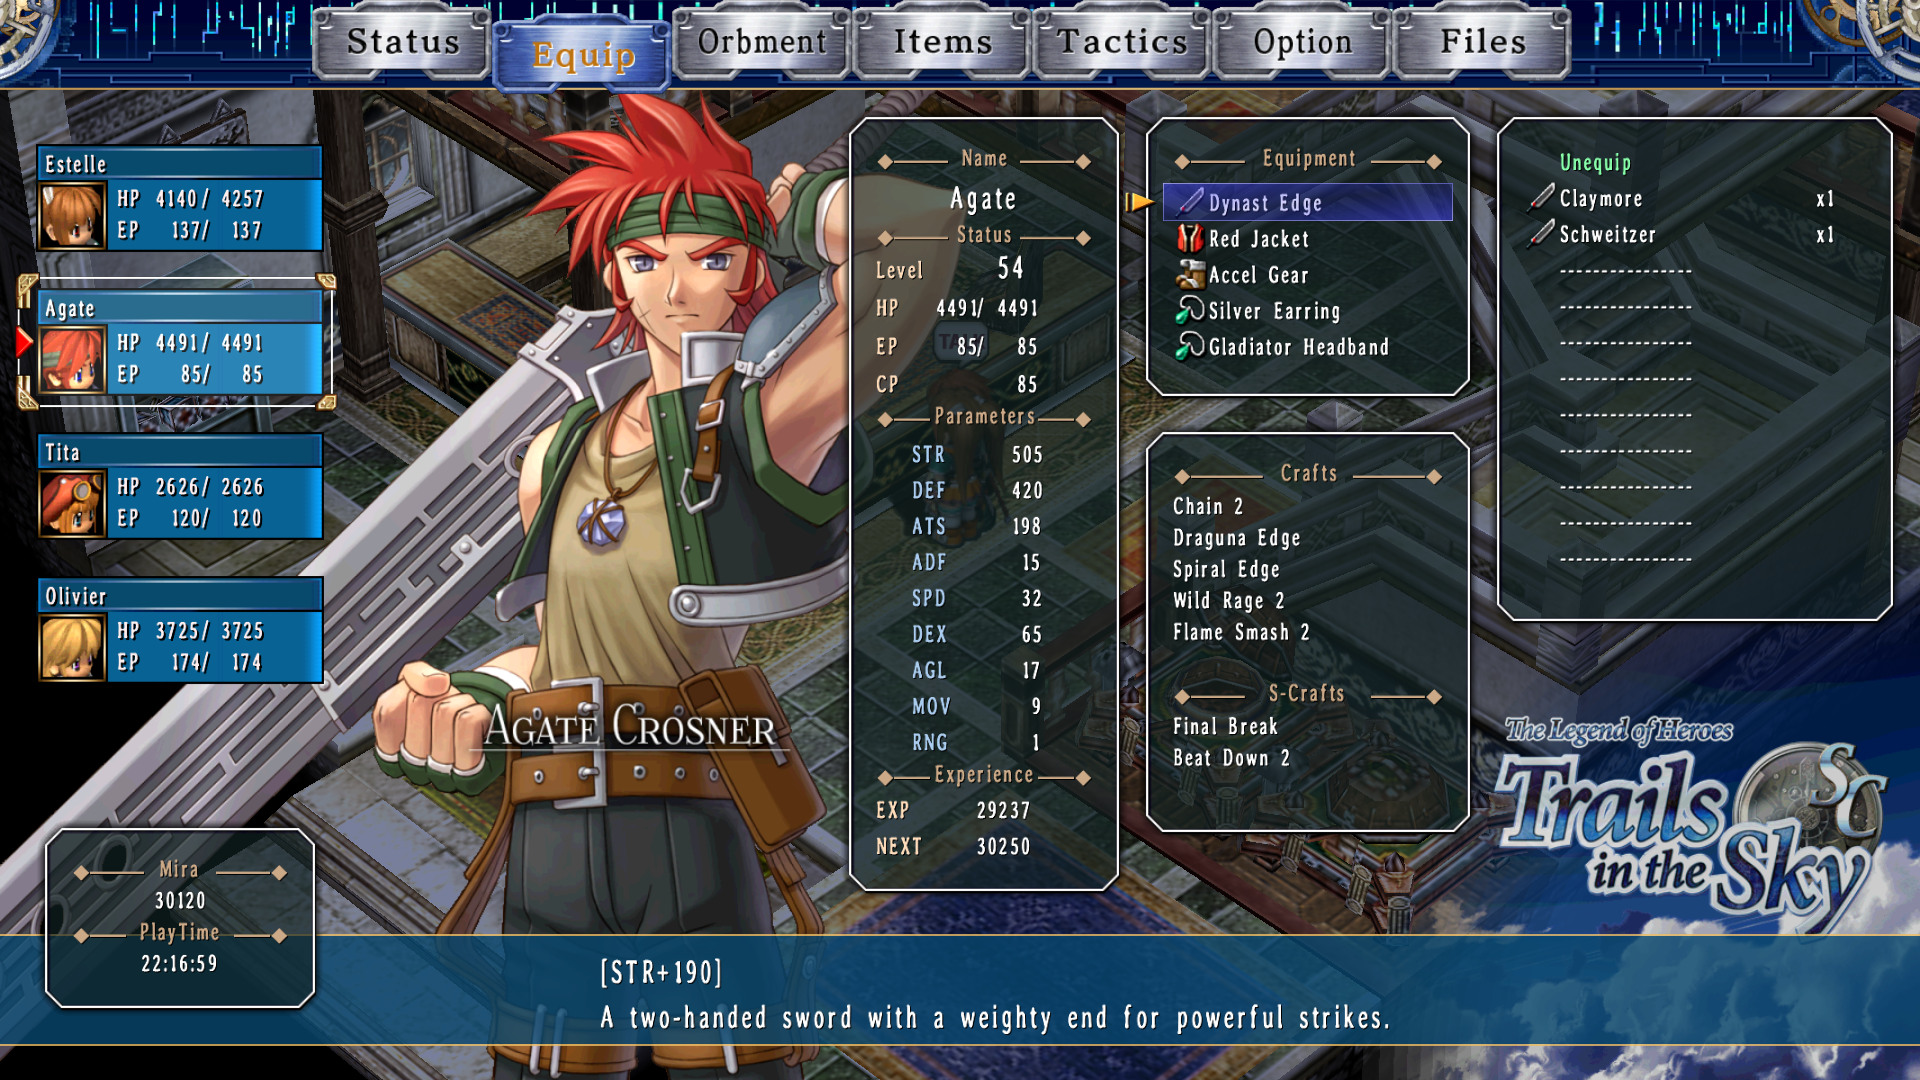 the legend of heroes trails in the sky third chapter english